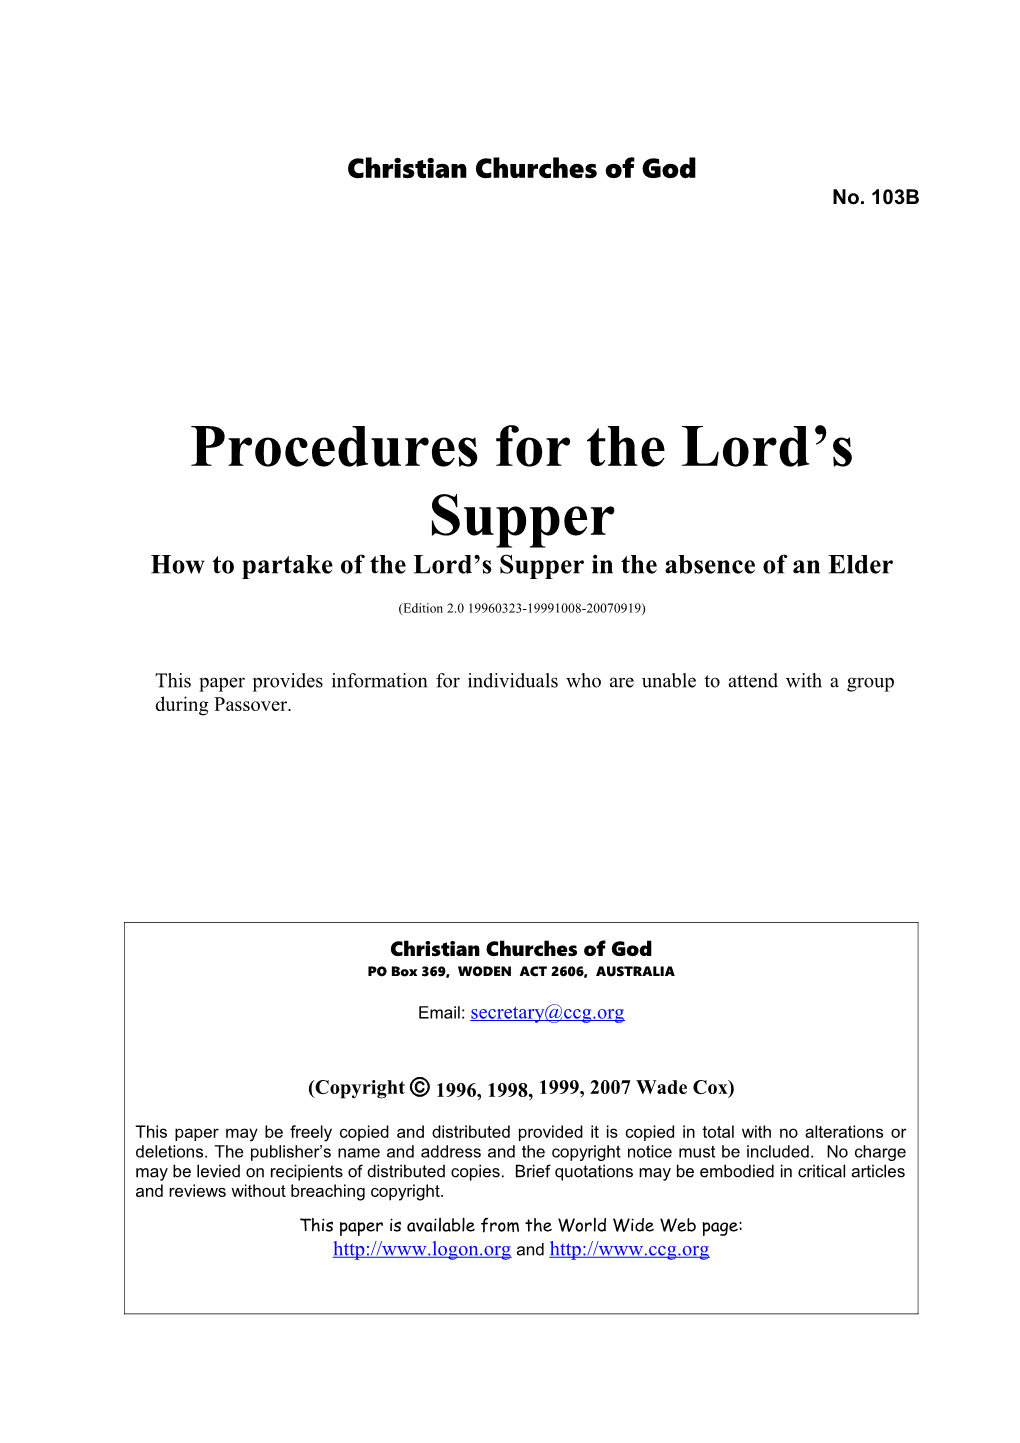 Procedures for the Lord's Supper (No. 103B)